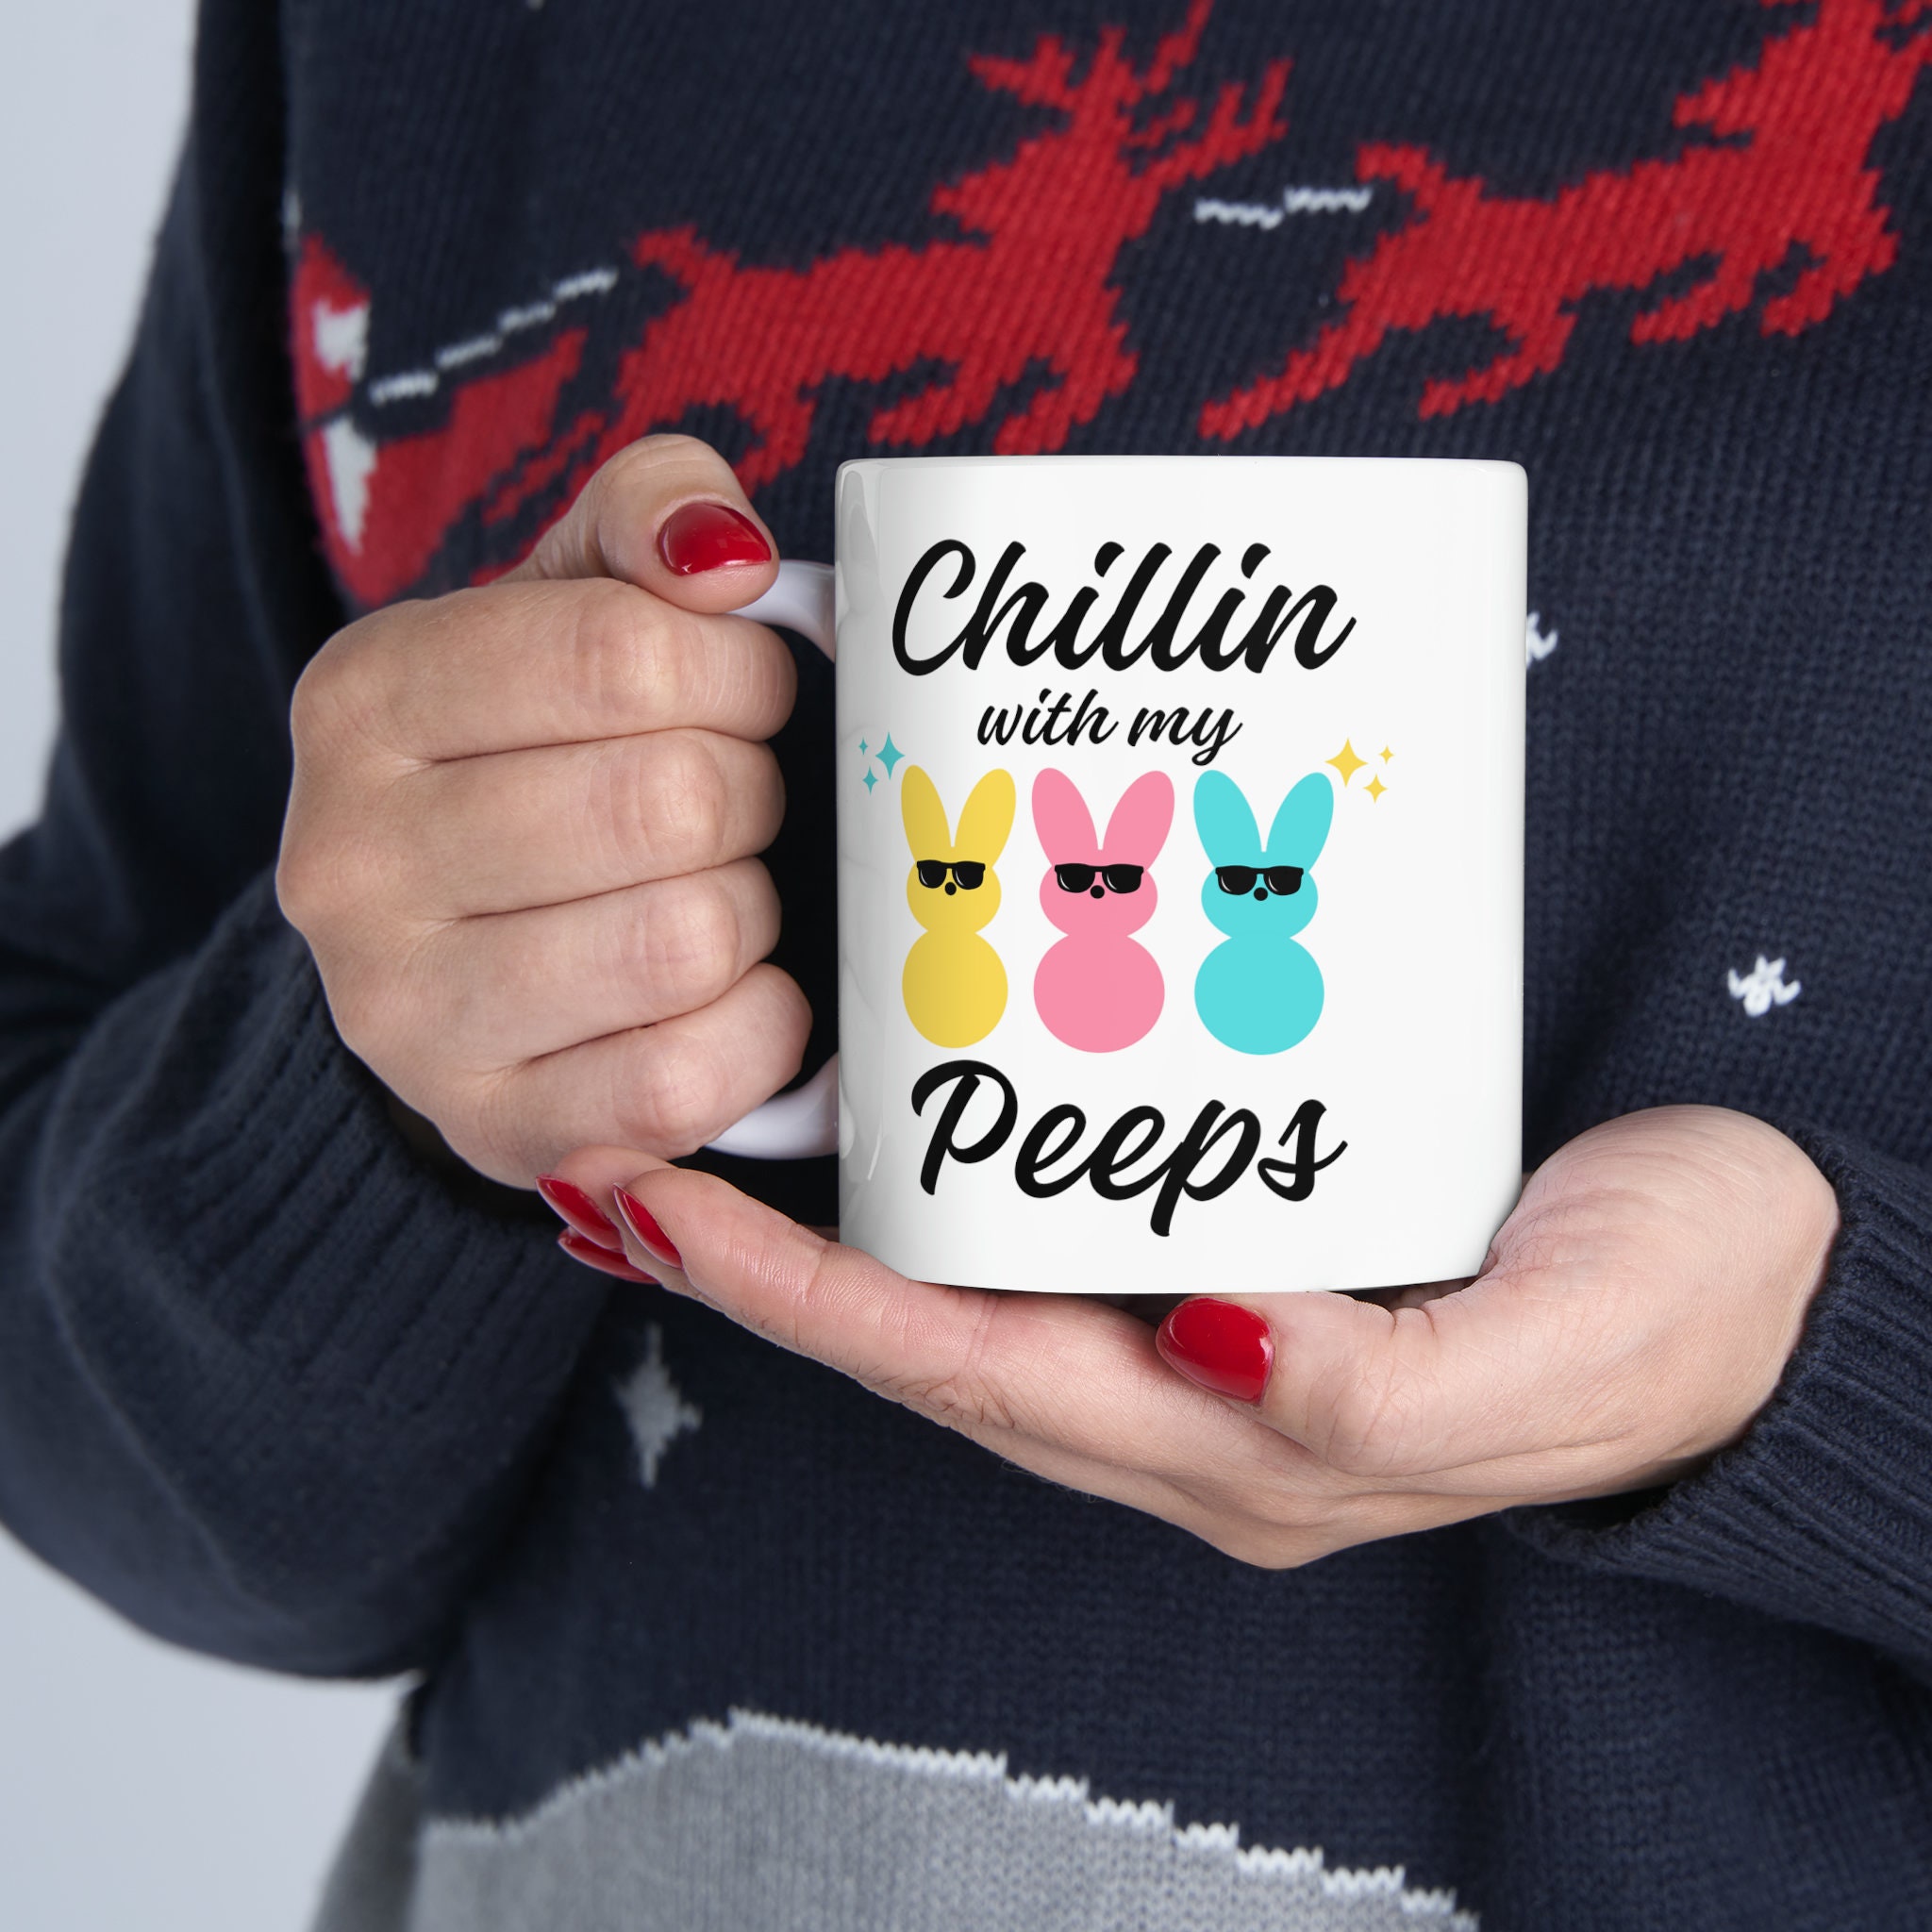 Chillin With My Peeps, Easter Spring Coffee Mug, Cute Spring Kitchen Decor, Easter Decor, Easter Tea Cup, Spring Housewarming Gifts, Easter